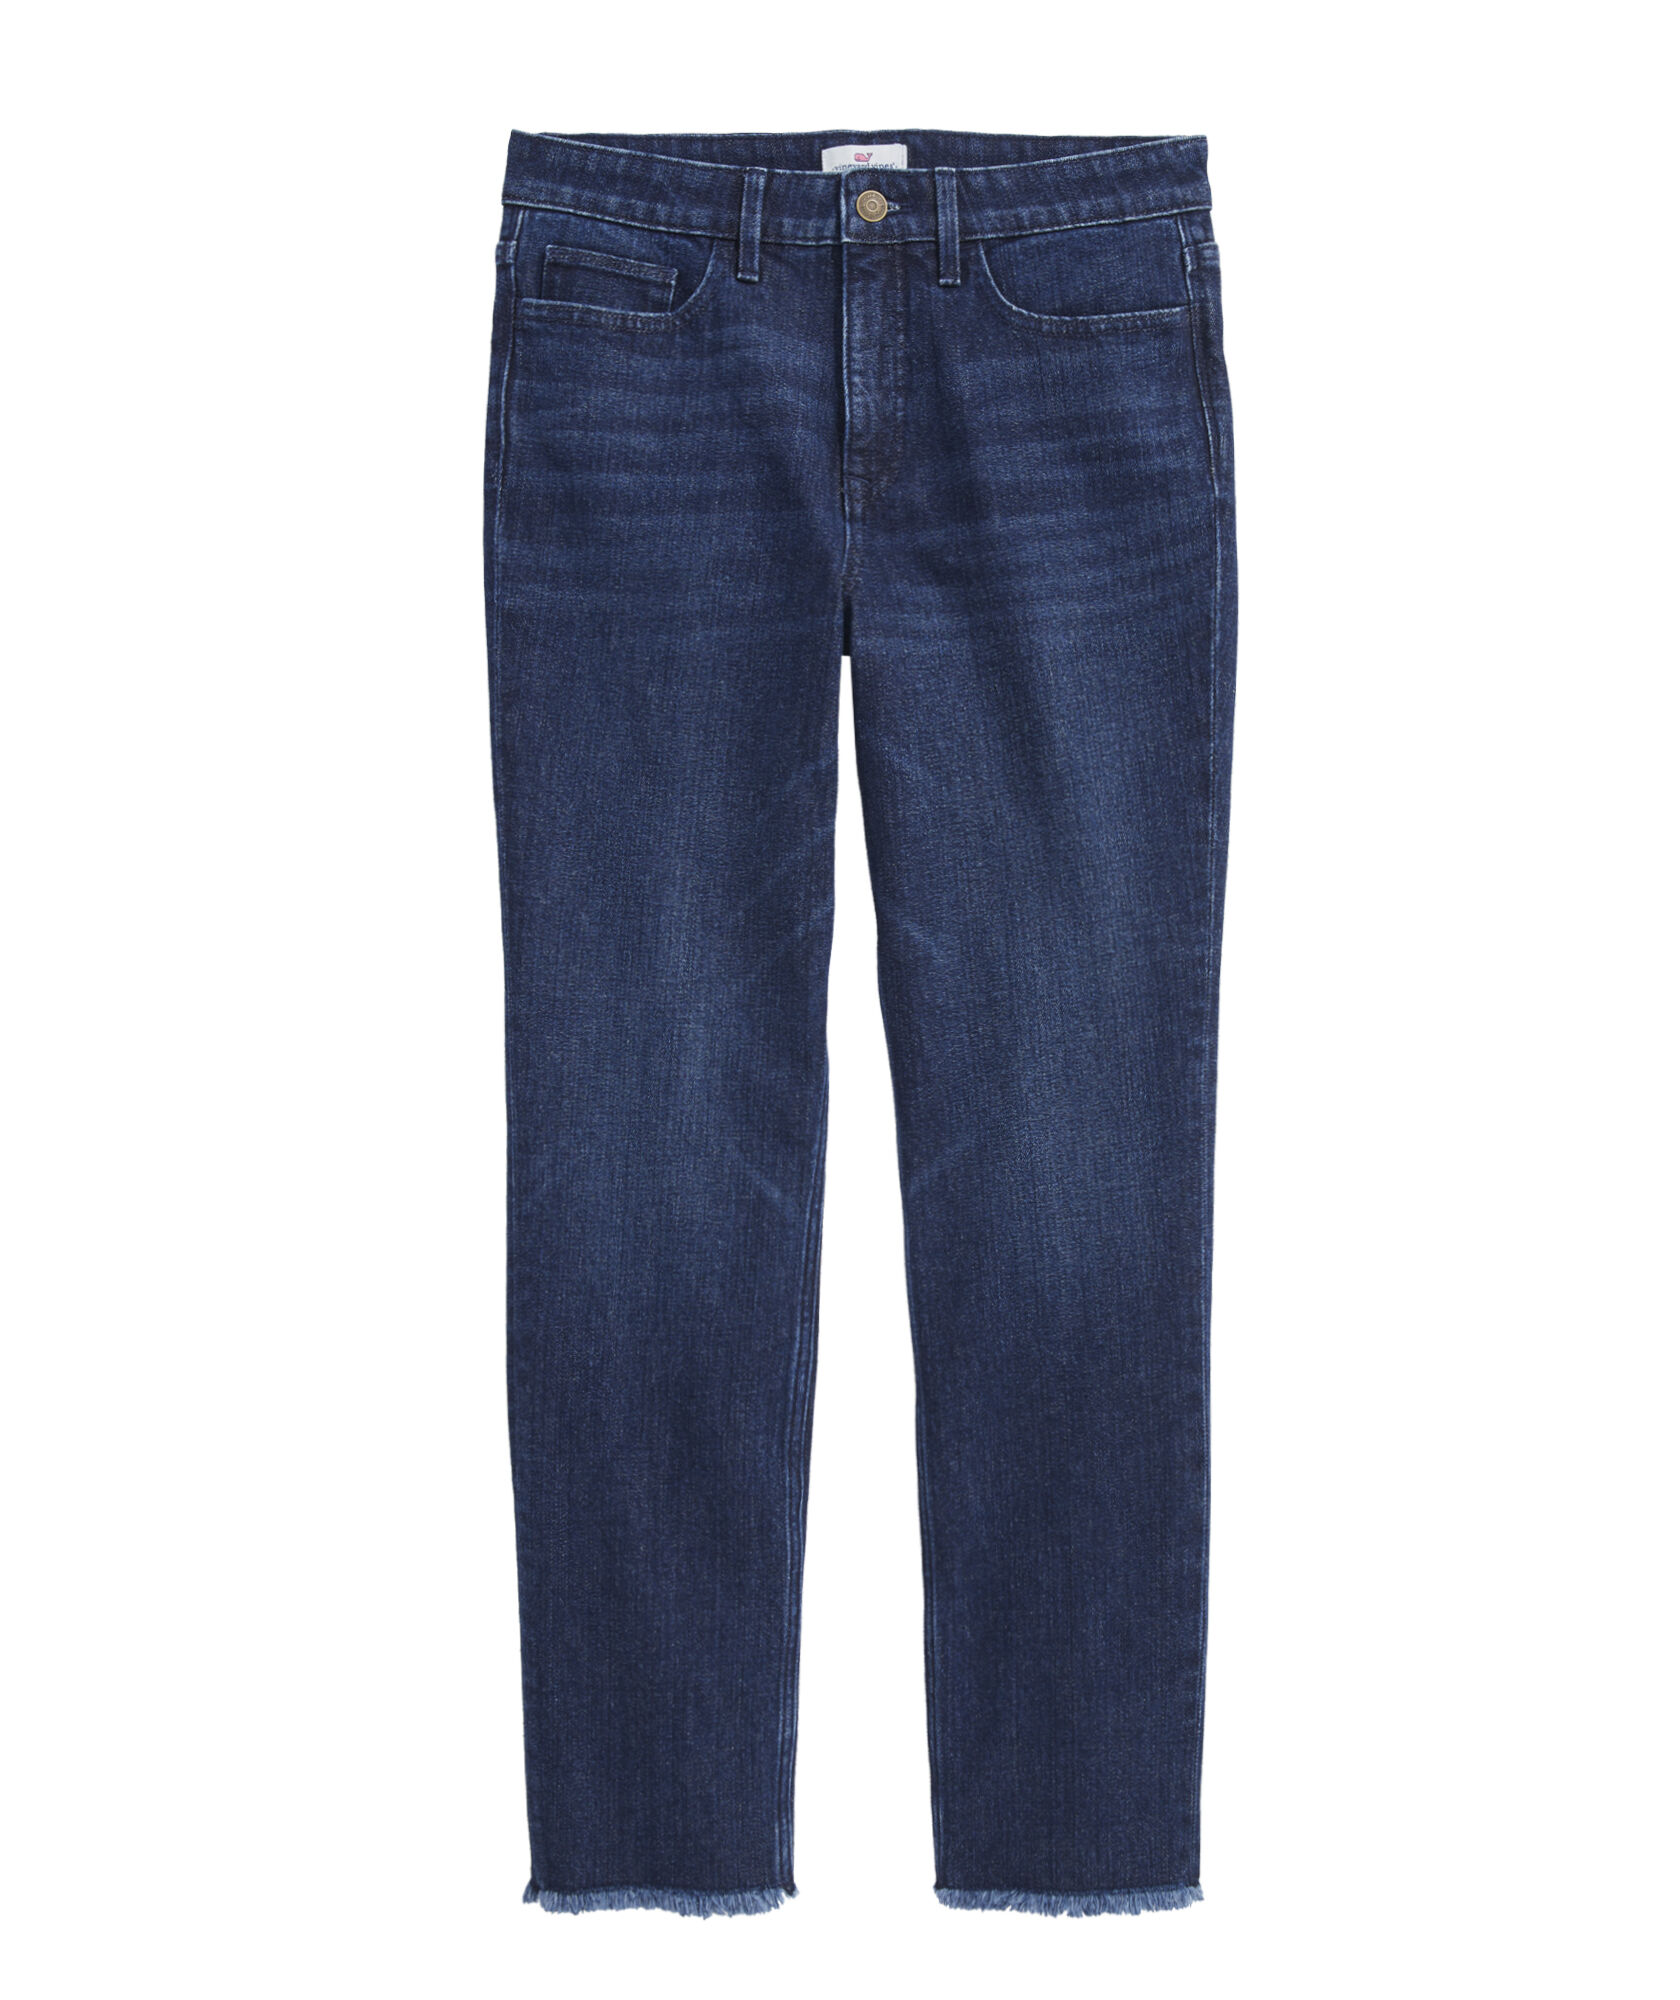 OUTLET Straight Crop Jeans